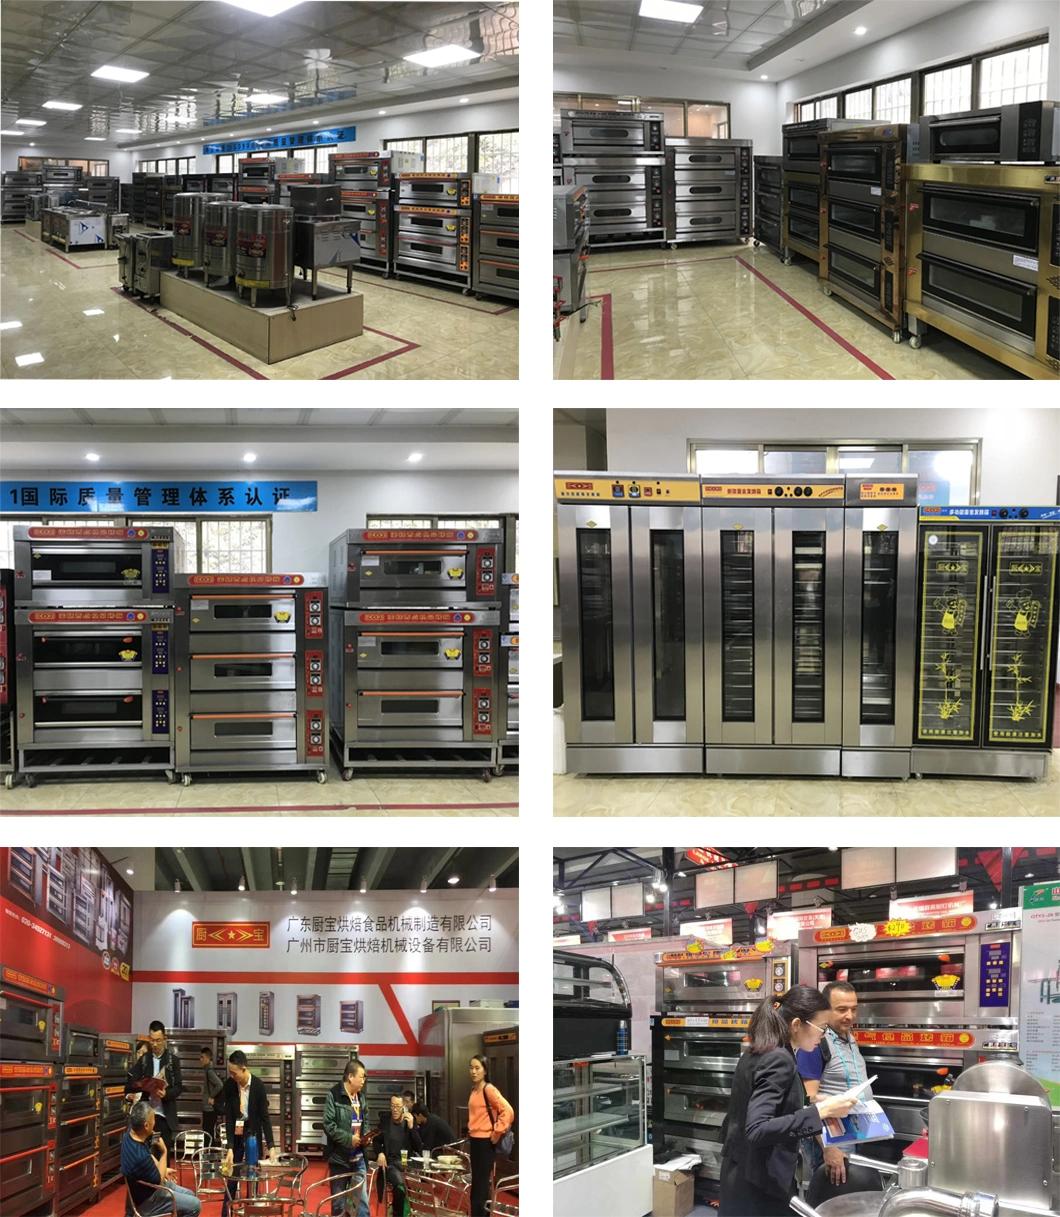 Commercial Restaurant Kitchen 3 Deck 6 Trays Electric Oven with Computer Controller for of Baking Equipment Bakery Machinery Food Machine